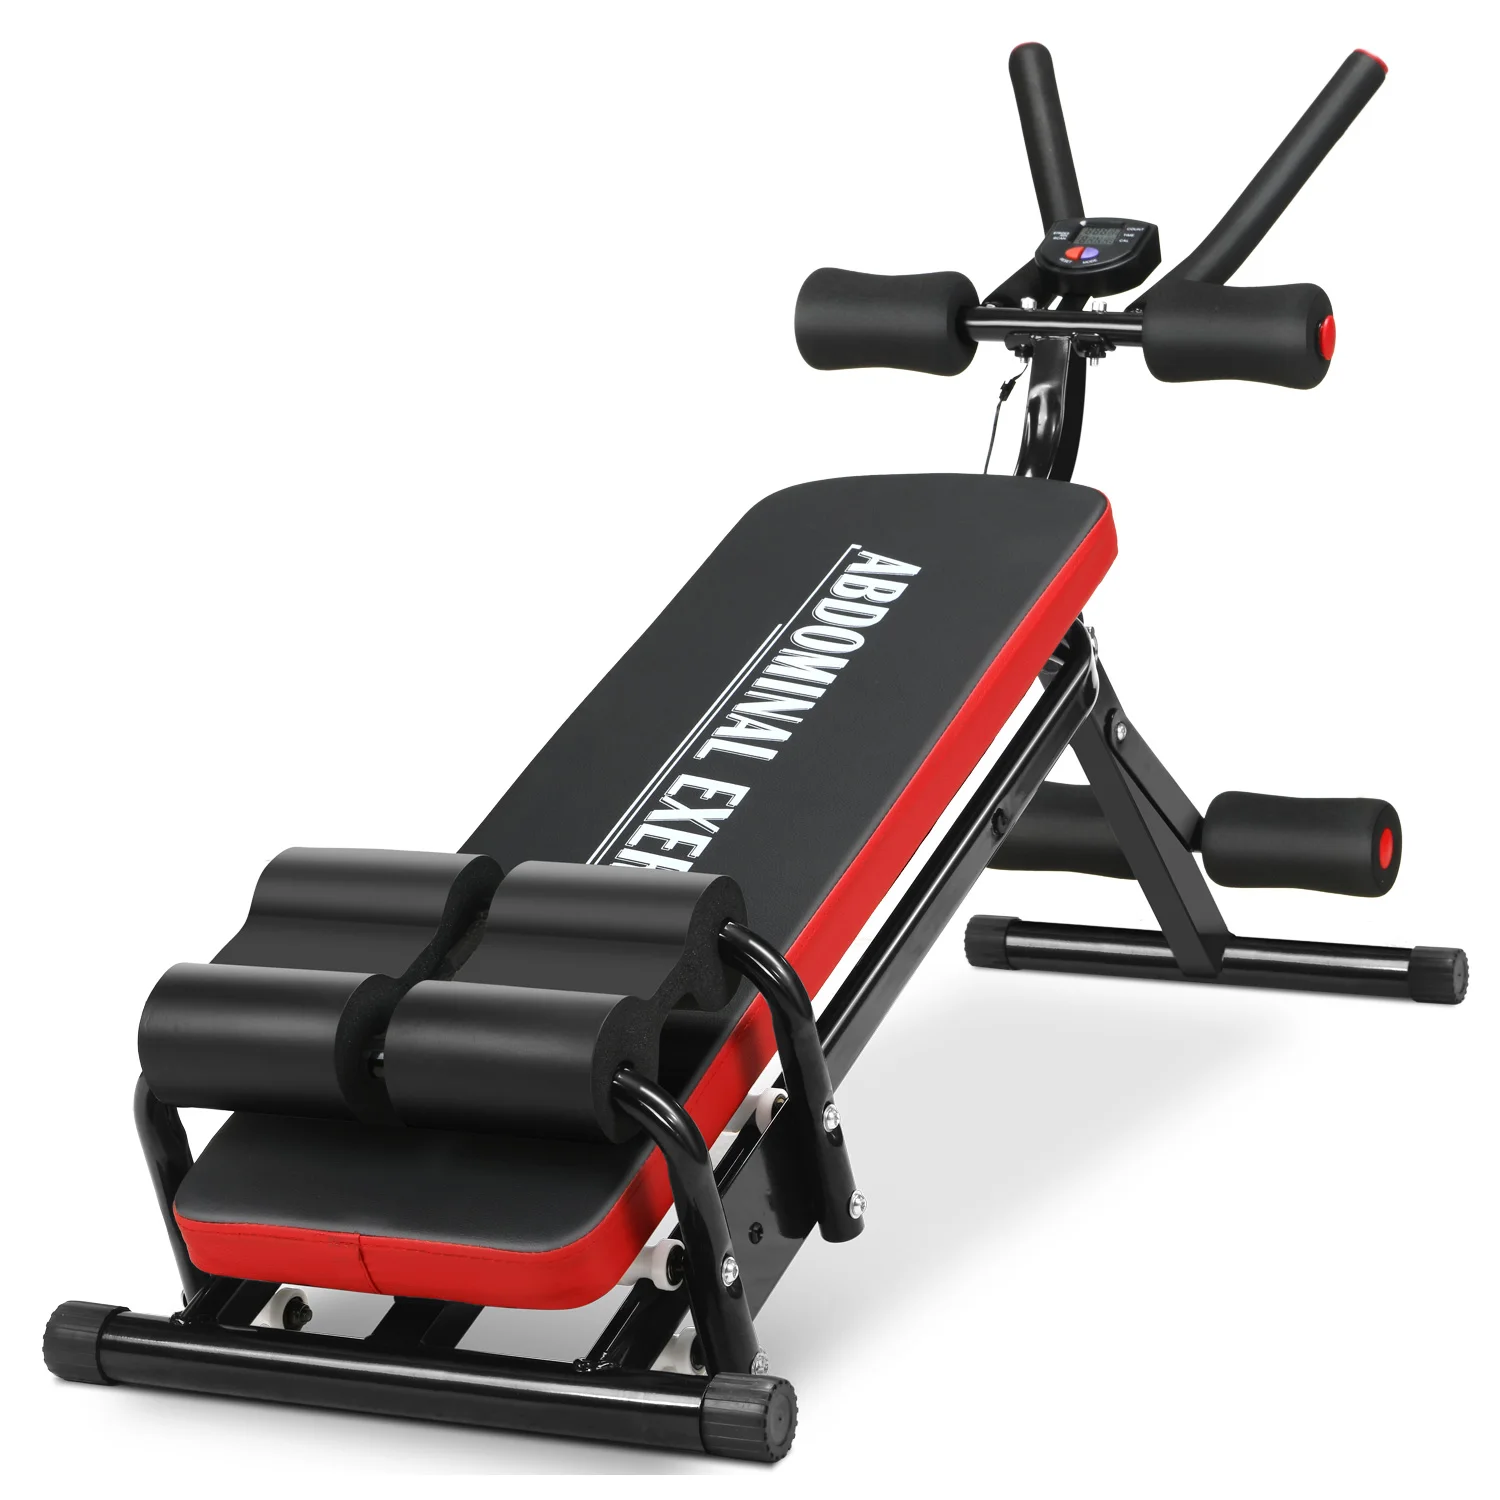 

Abdominal Workout Machine Core Abdominal Trainers Adjustable Sit Up Exercise Equipment Body Workout Bench for Home Gym, Black